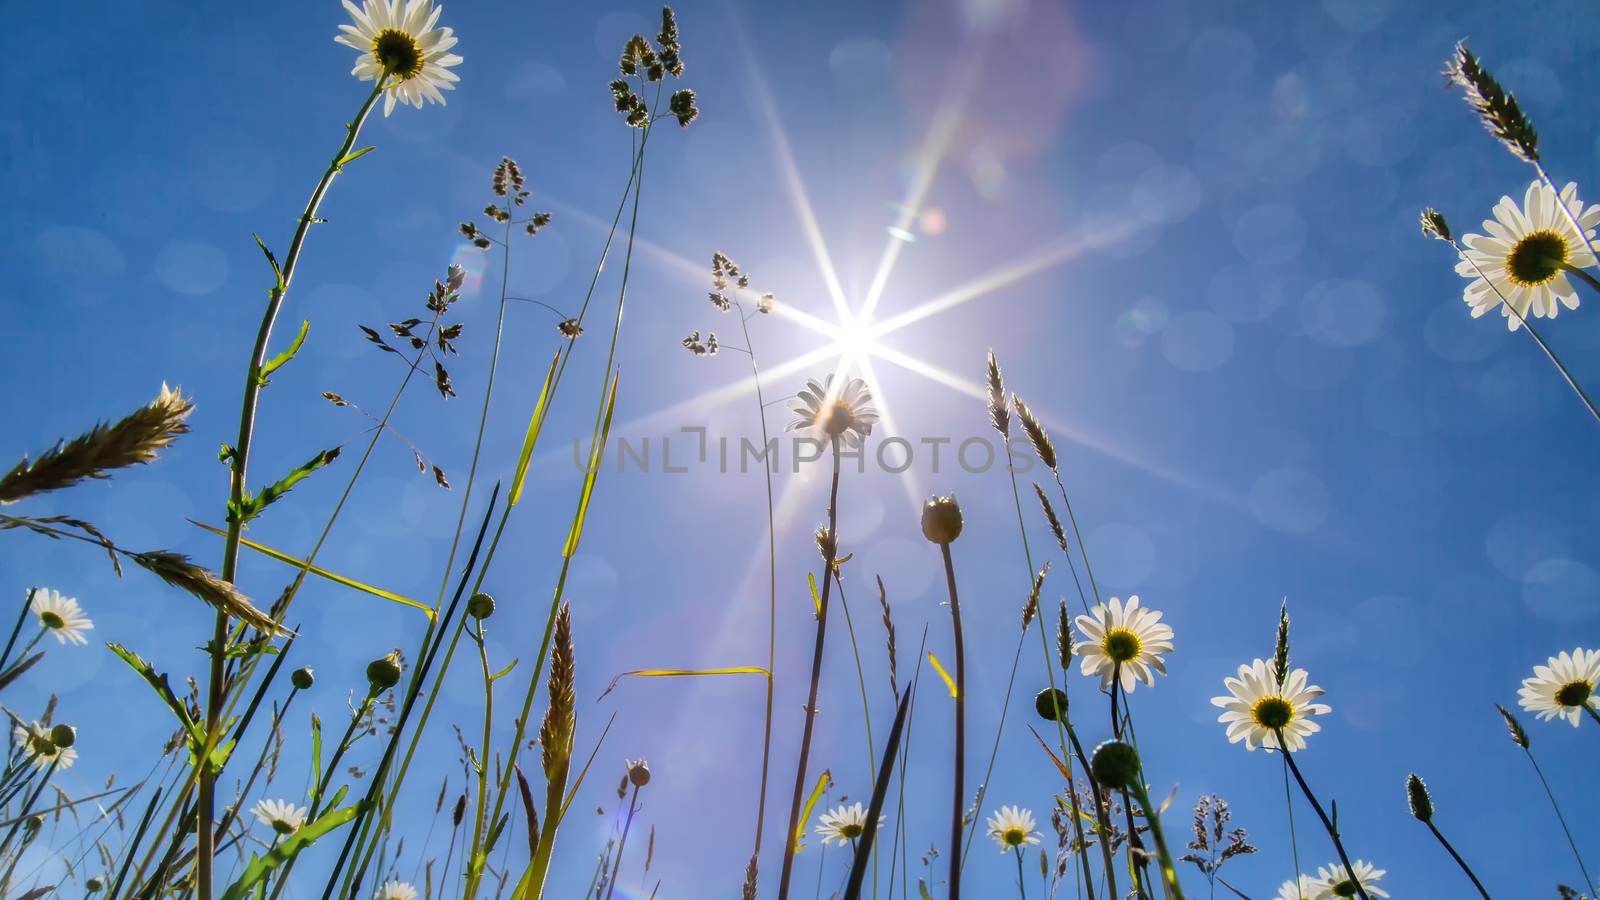 Daisies Under the Sun by backyard_photography